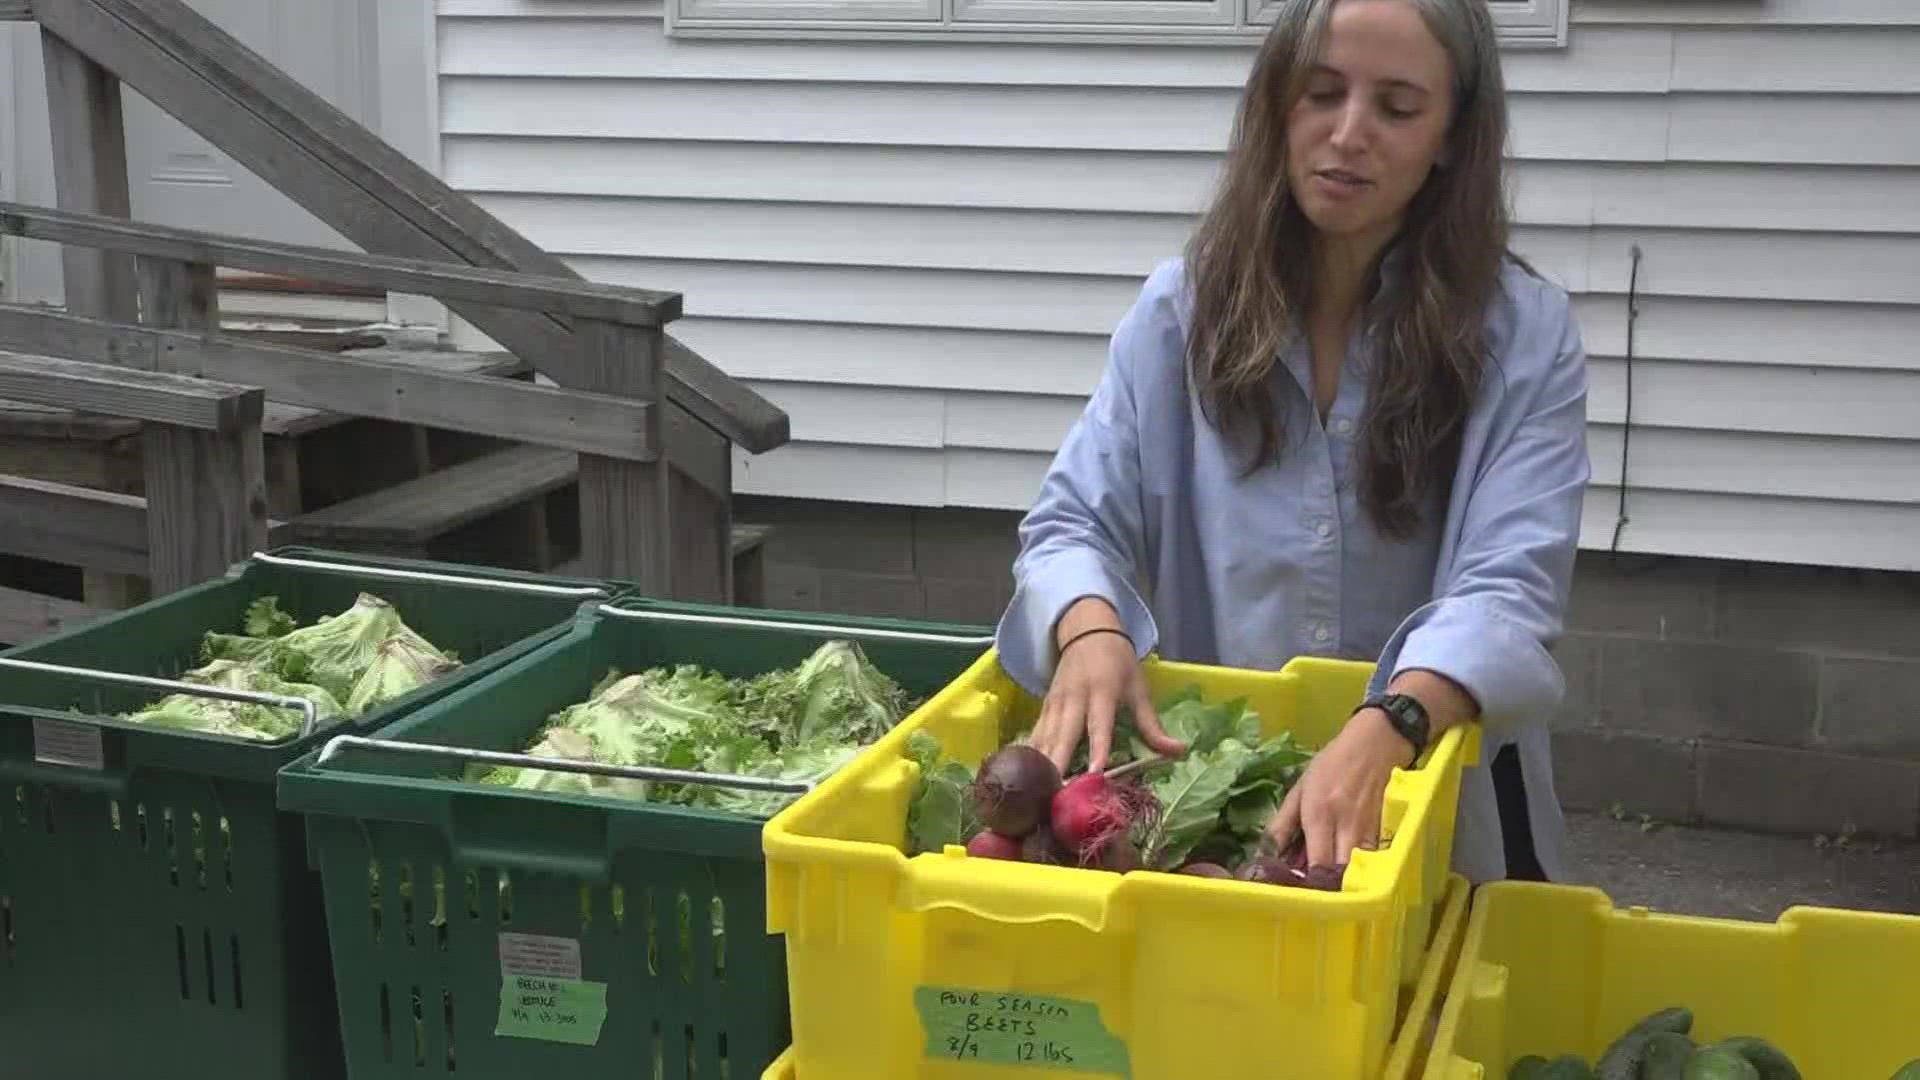 Every year, Healthy Acadia’s Downeast Gleaning Initiative partners with dozens of farmers to harvest and give extra produce to food pantries.